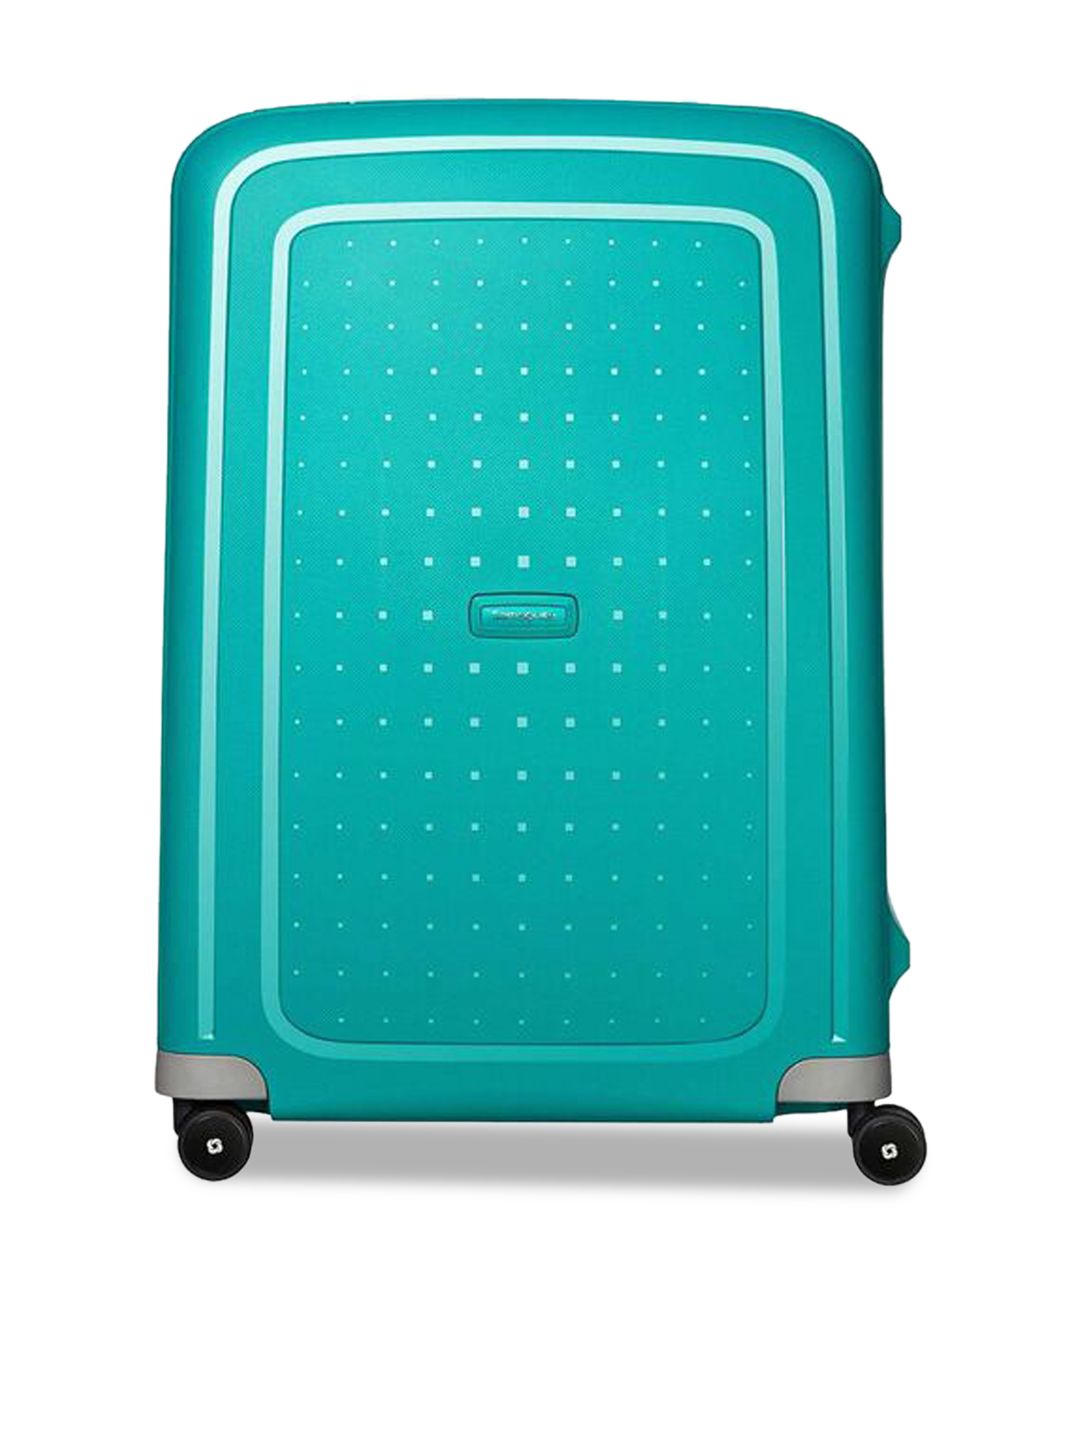 Samsonite Teal Blue Solid Textured Hard Sided Large Trolley Suitcase Price in India